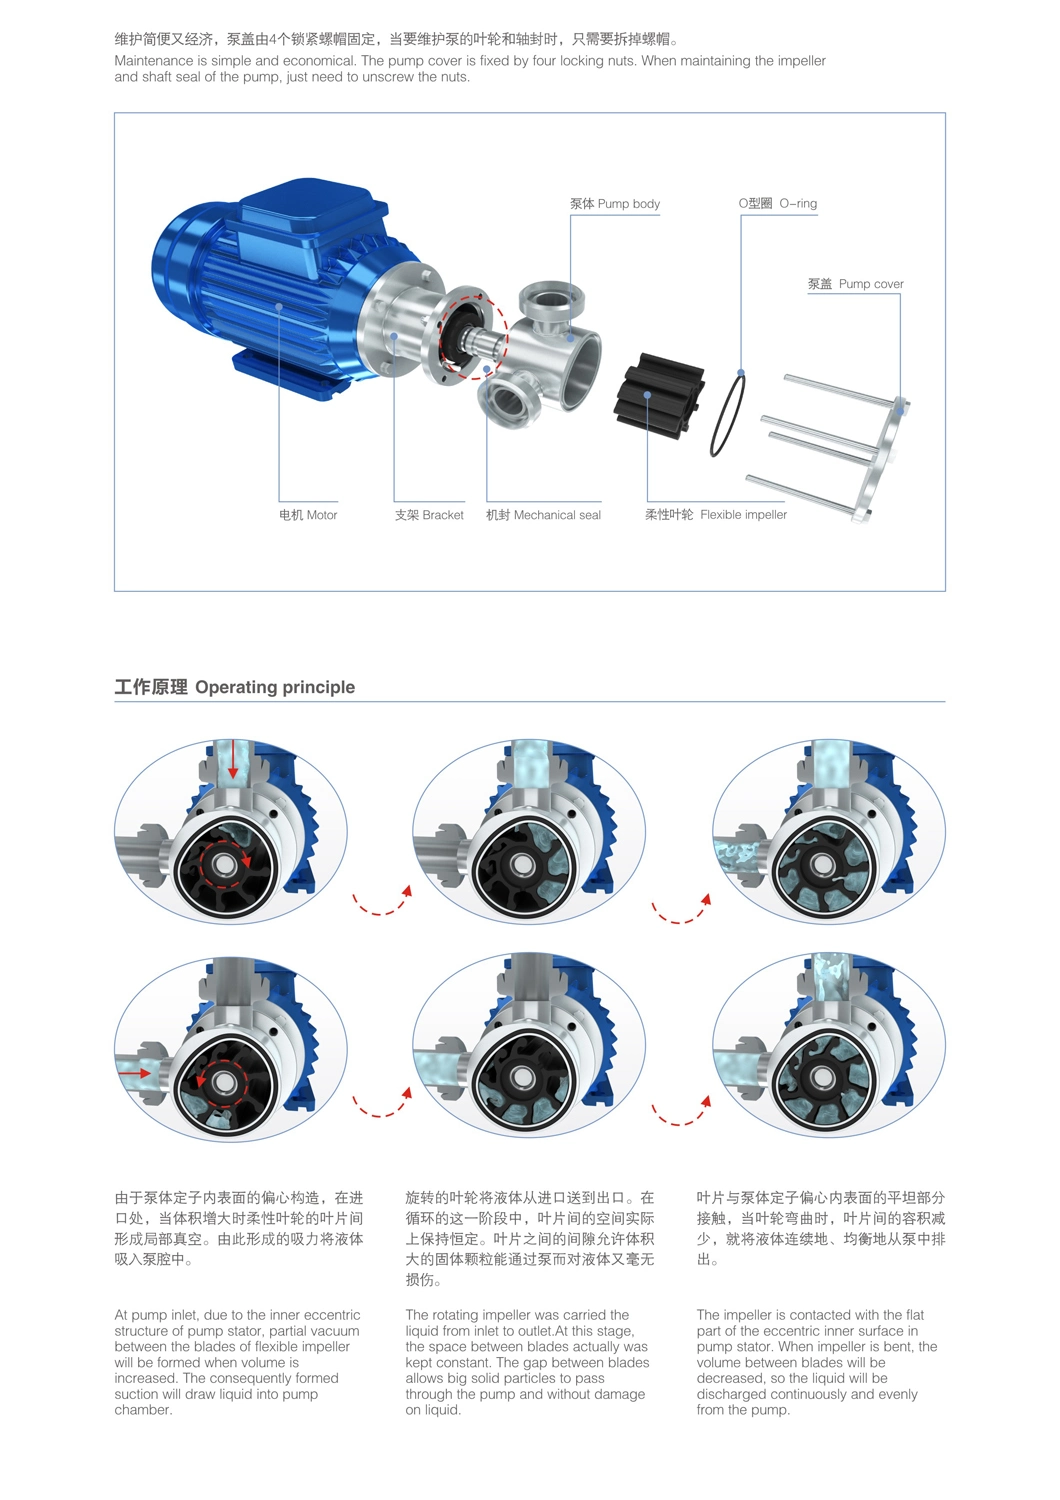 Donjoy Hygienic Flexible Impeller Pump Manufacturer in China